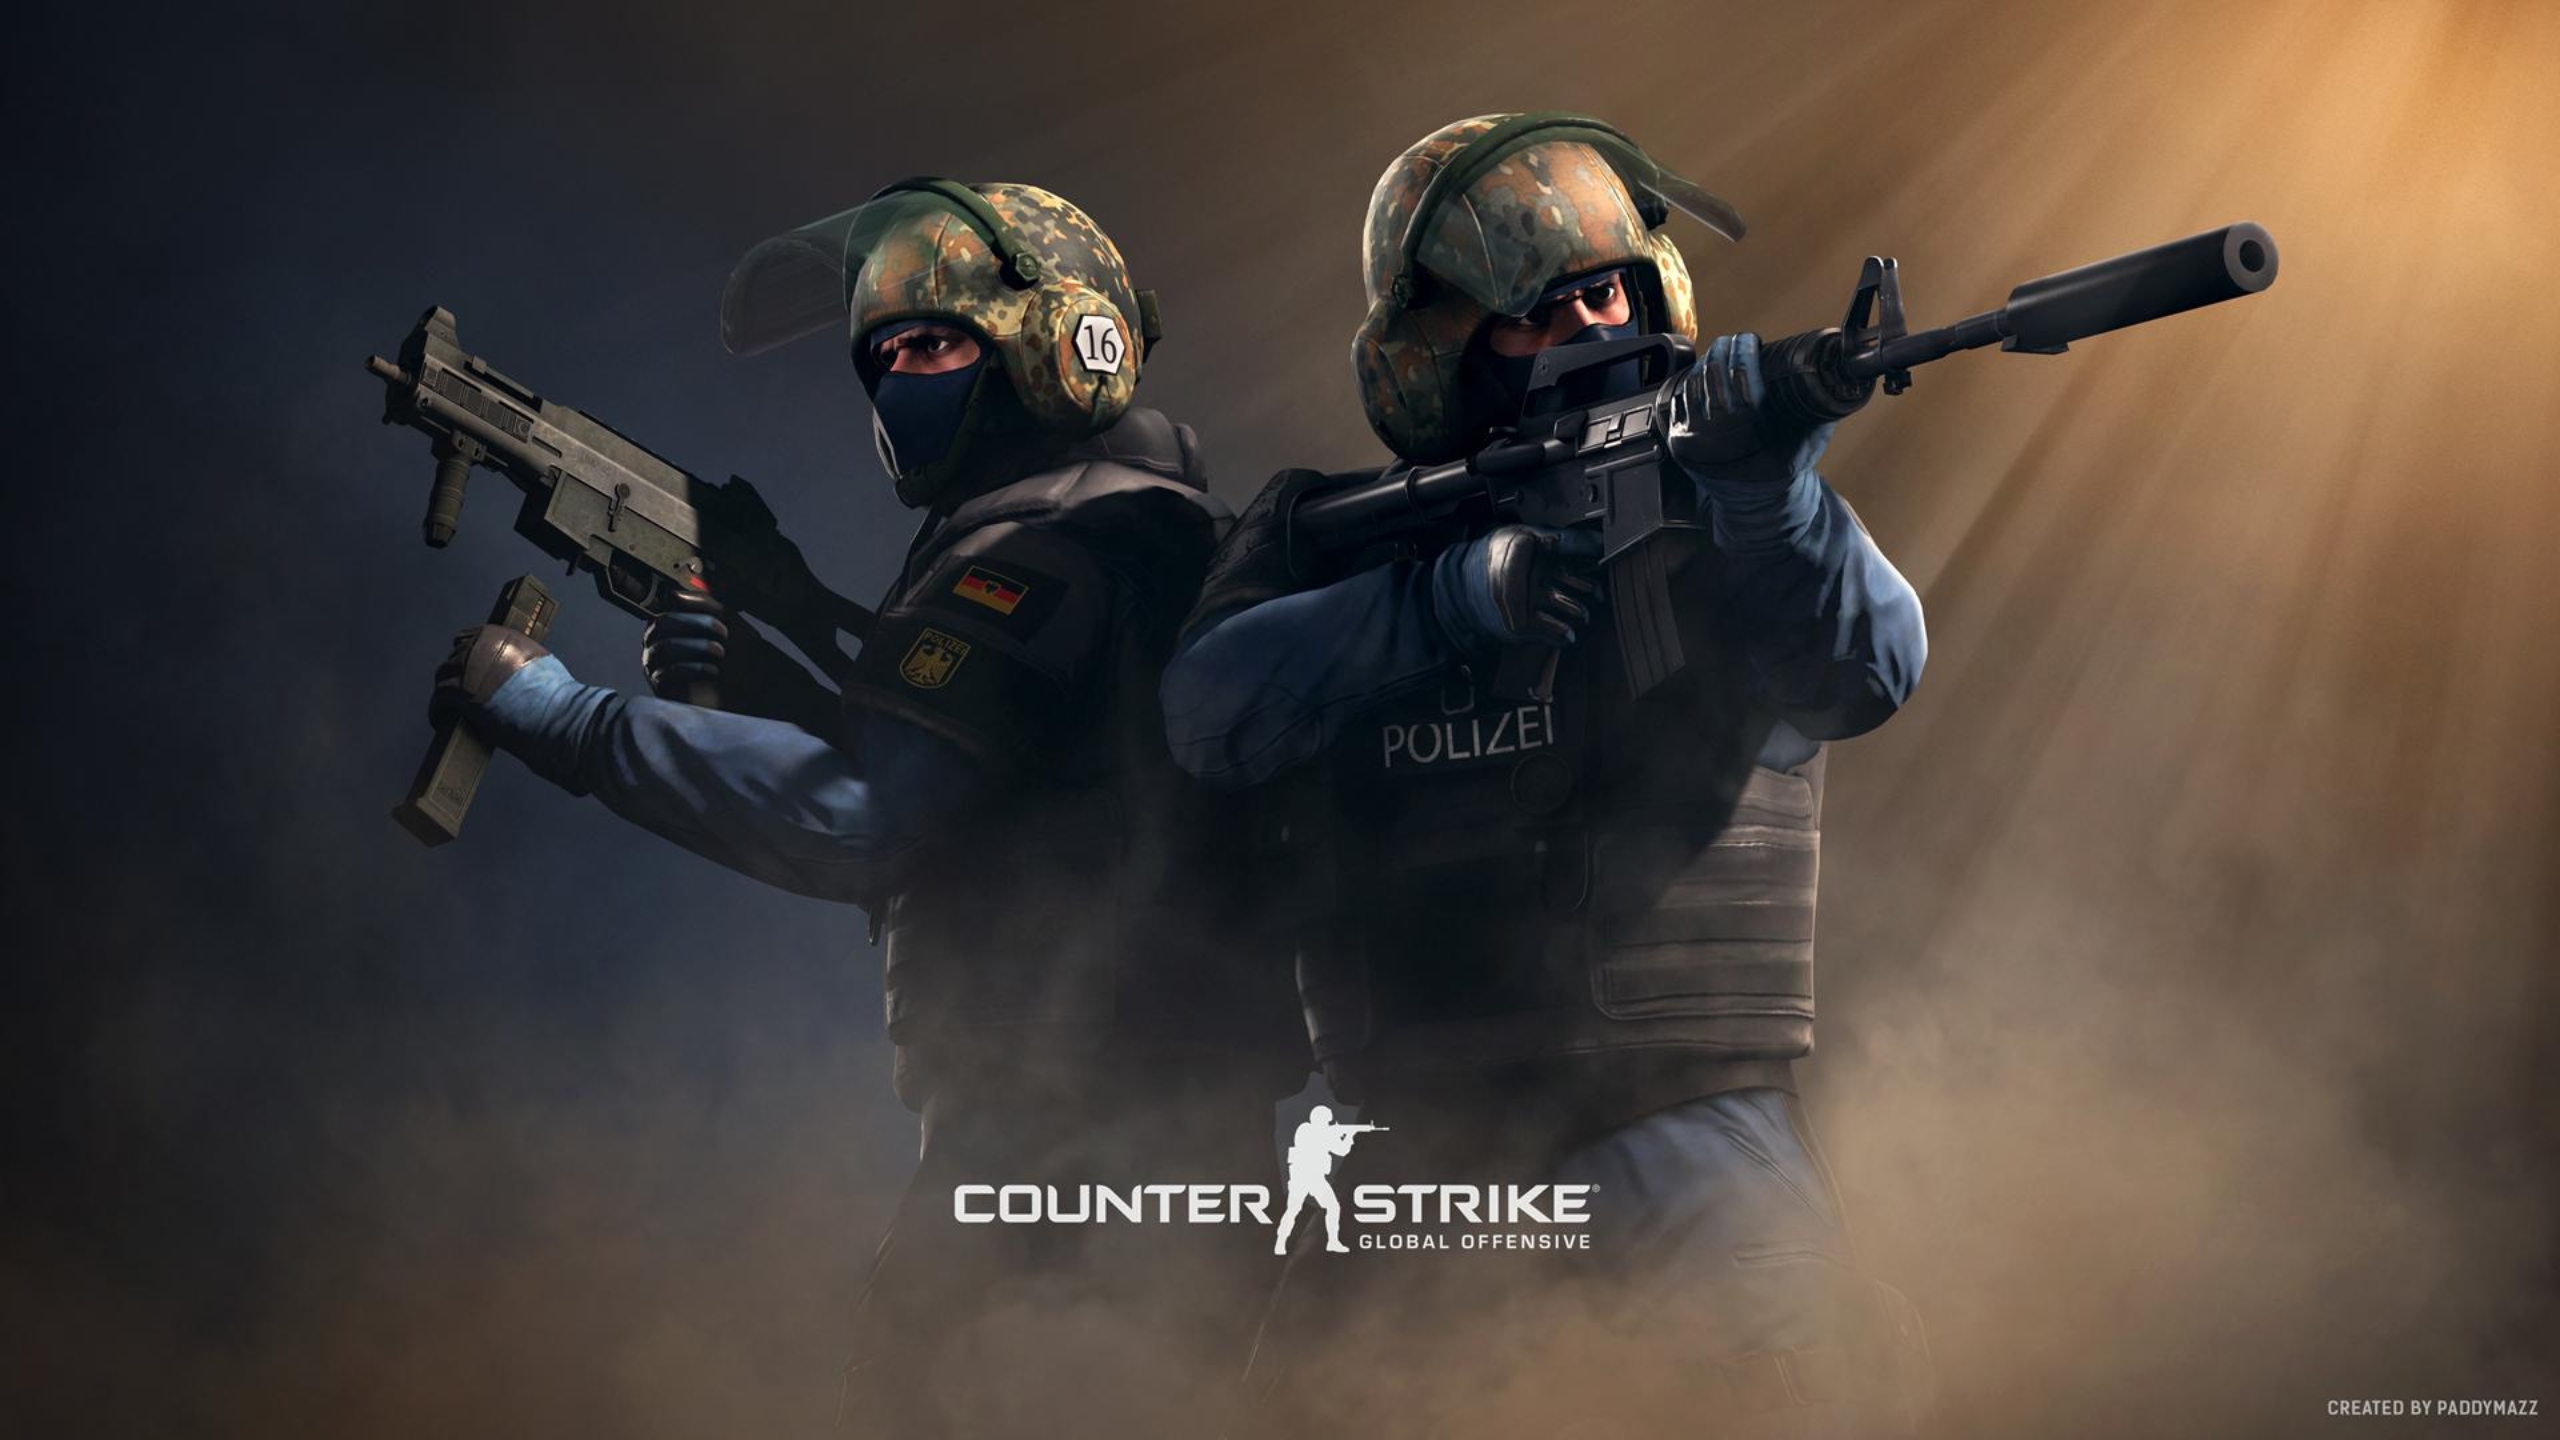 Counter-Strike 2 launch could be soon as Valve unveils brand-new logo